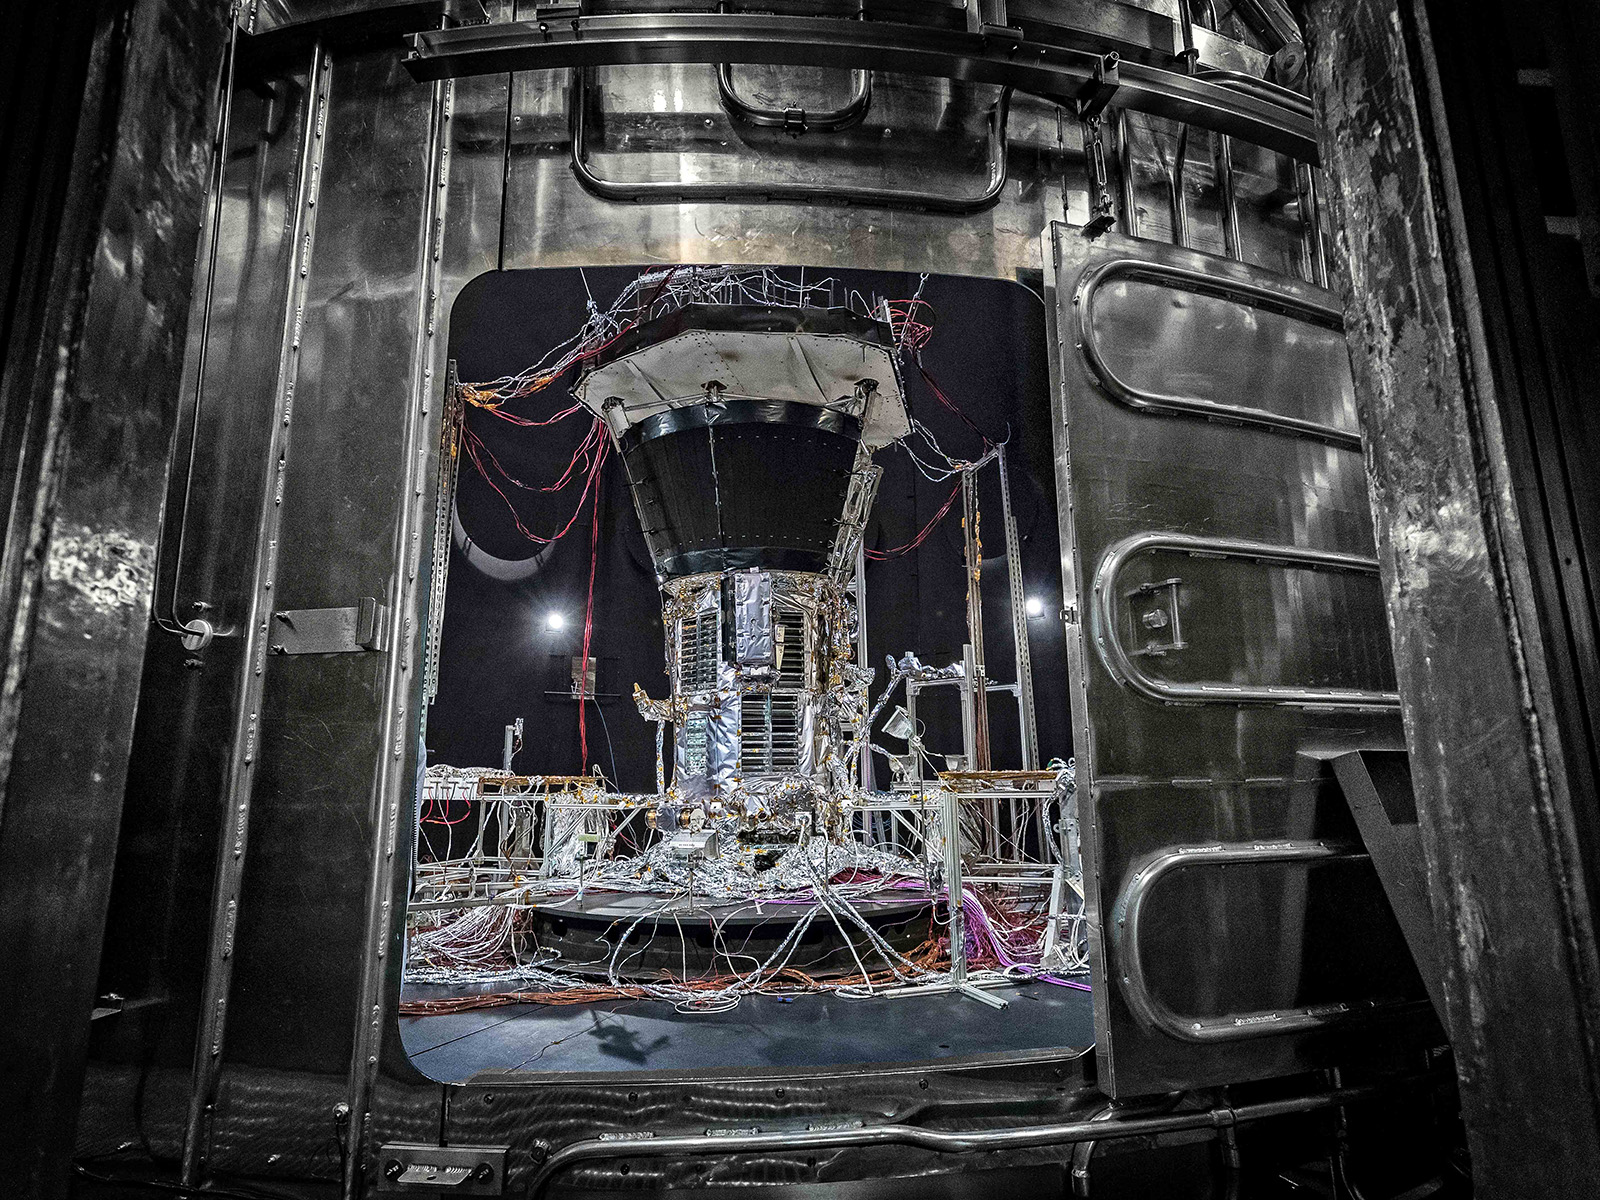 NASA’s Parker Solar Probe, shown inside the thermal vacuum chamber at NASA’s Goddard Space Flight Center just before the main hatch is closed to begin space environment testing. The thermal vacuum chamber duplicates the airless environment of space and simulates the cold and hot temperature cycles the spacecraft will endure during its seven-year exploration of the Sun. 